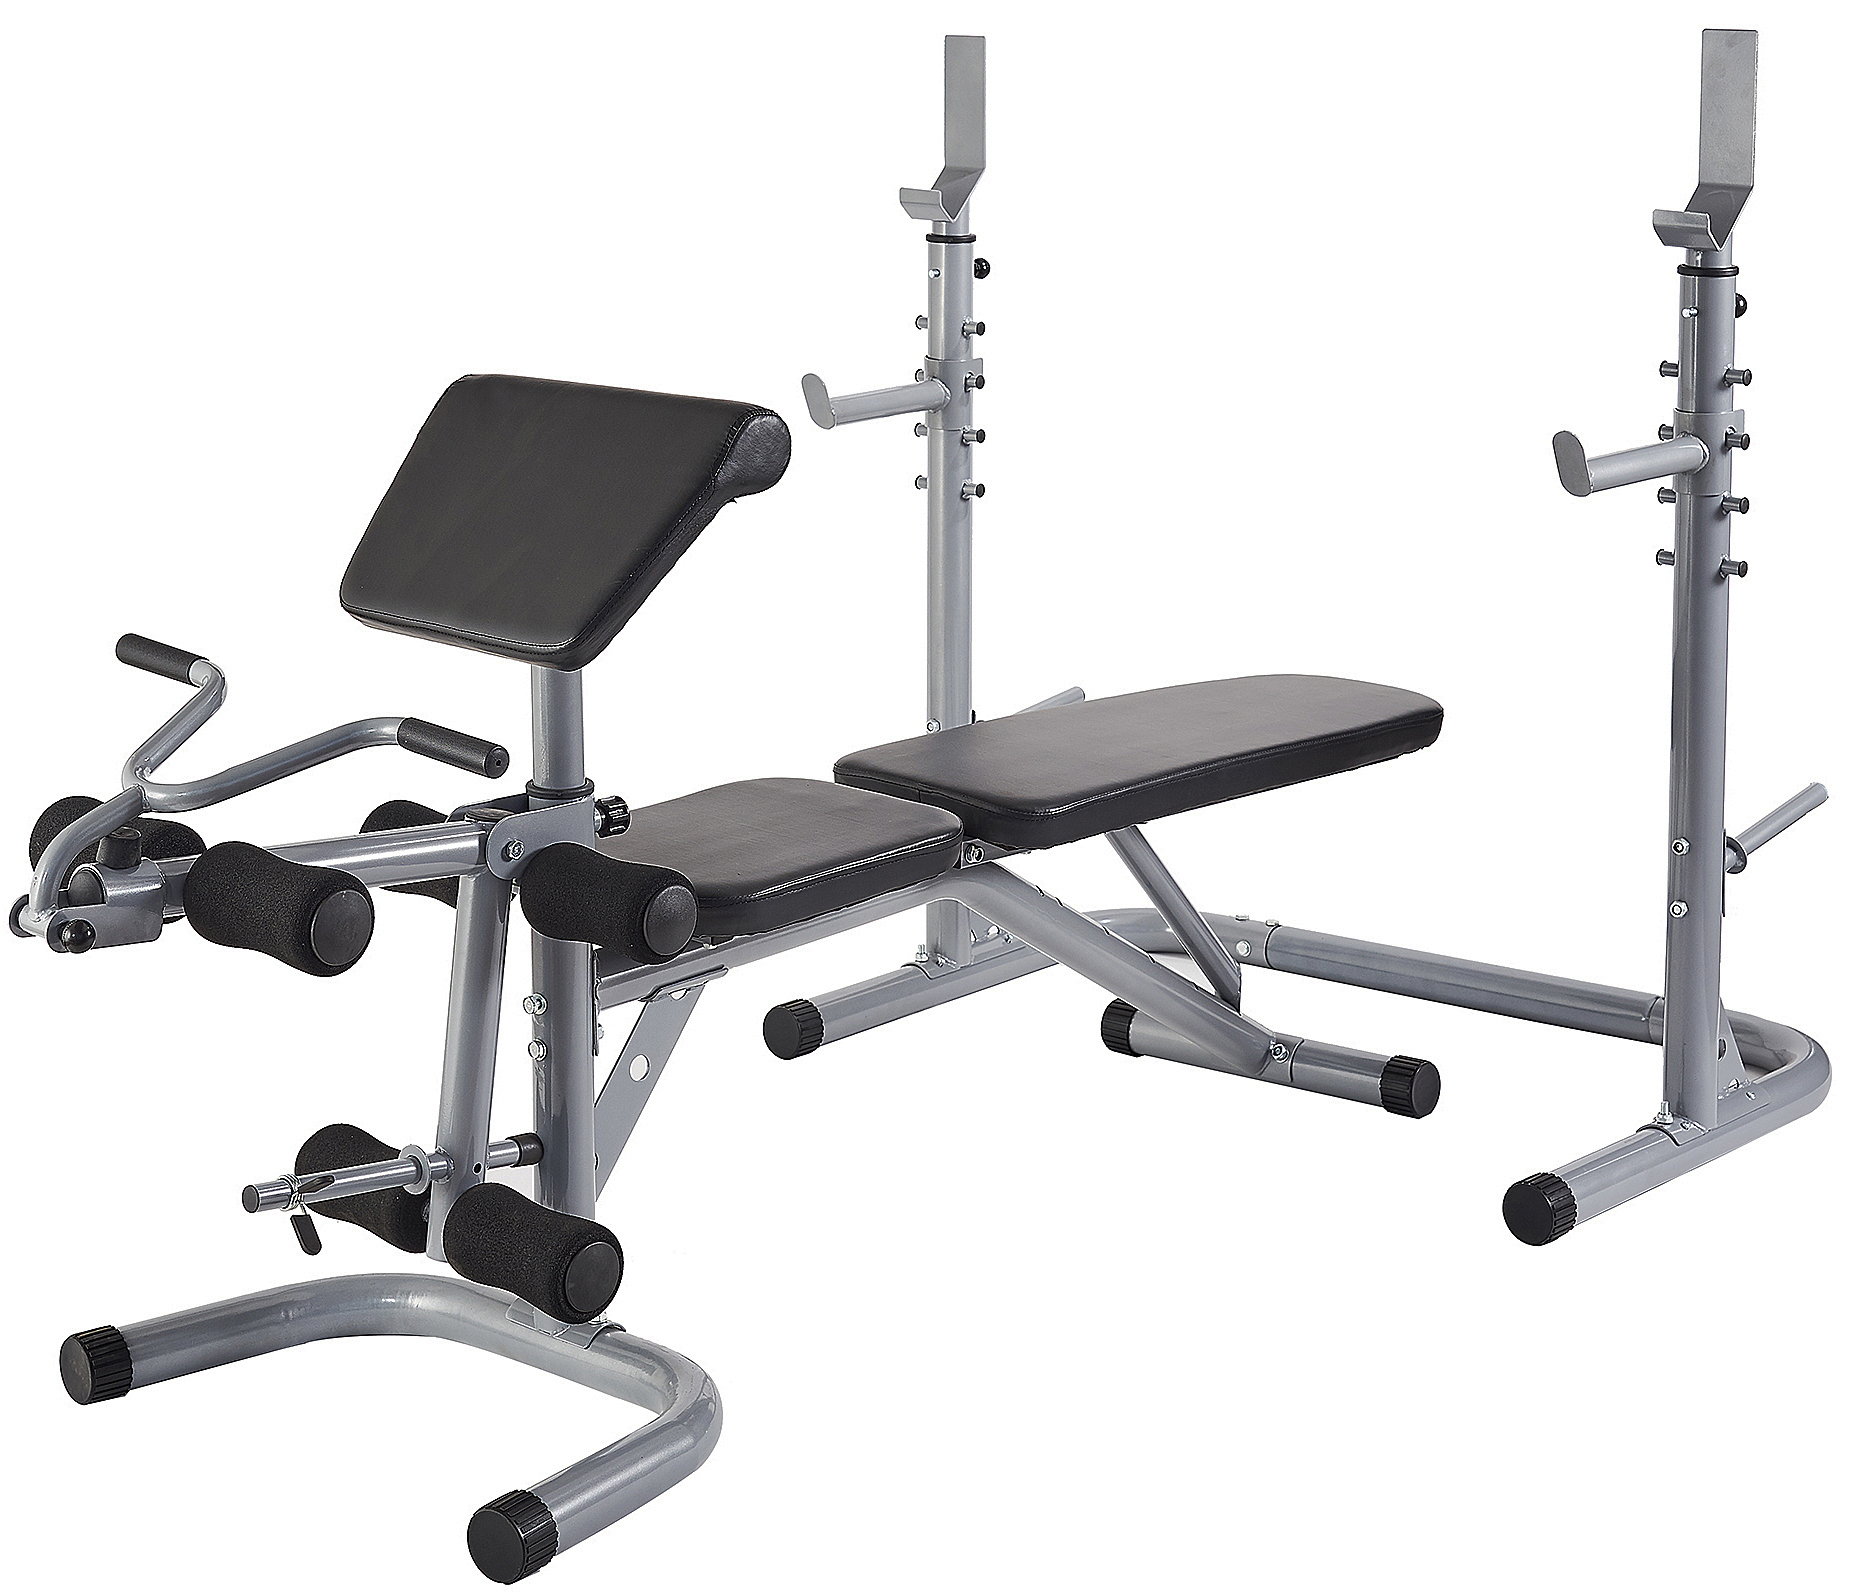 BalanceFromÂ&nbsp;RS 60 Multifunctional Workout StationÂ&nbsp;Adjustable Olympic Workout Bench with Squat Rack,Â&nbsp;Leg Extension, Preacher Curl, and Weight Storage, 800-Pound Capacity - image 5 of 6